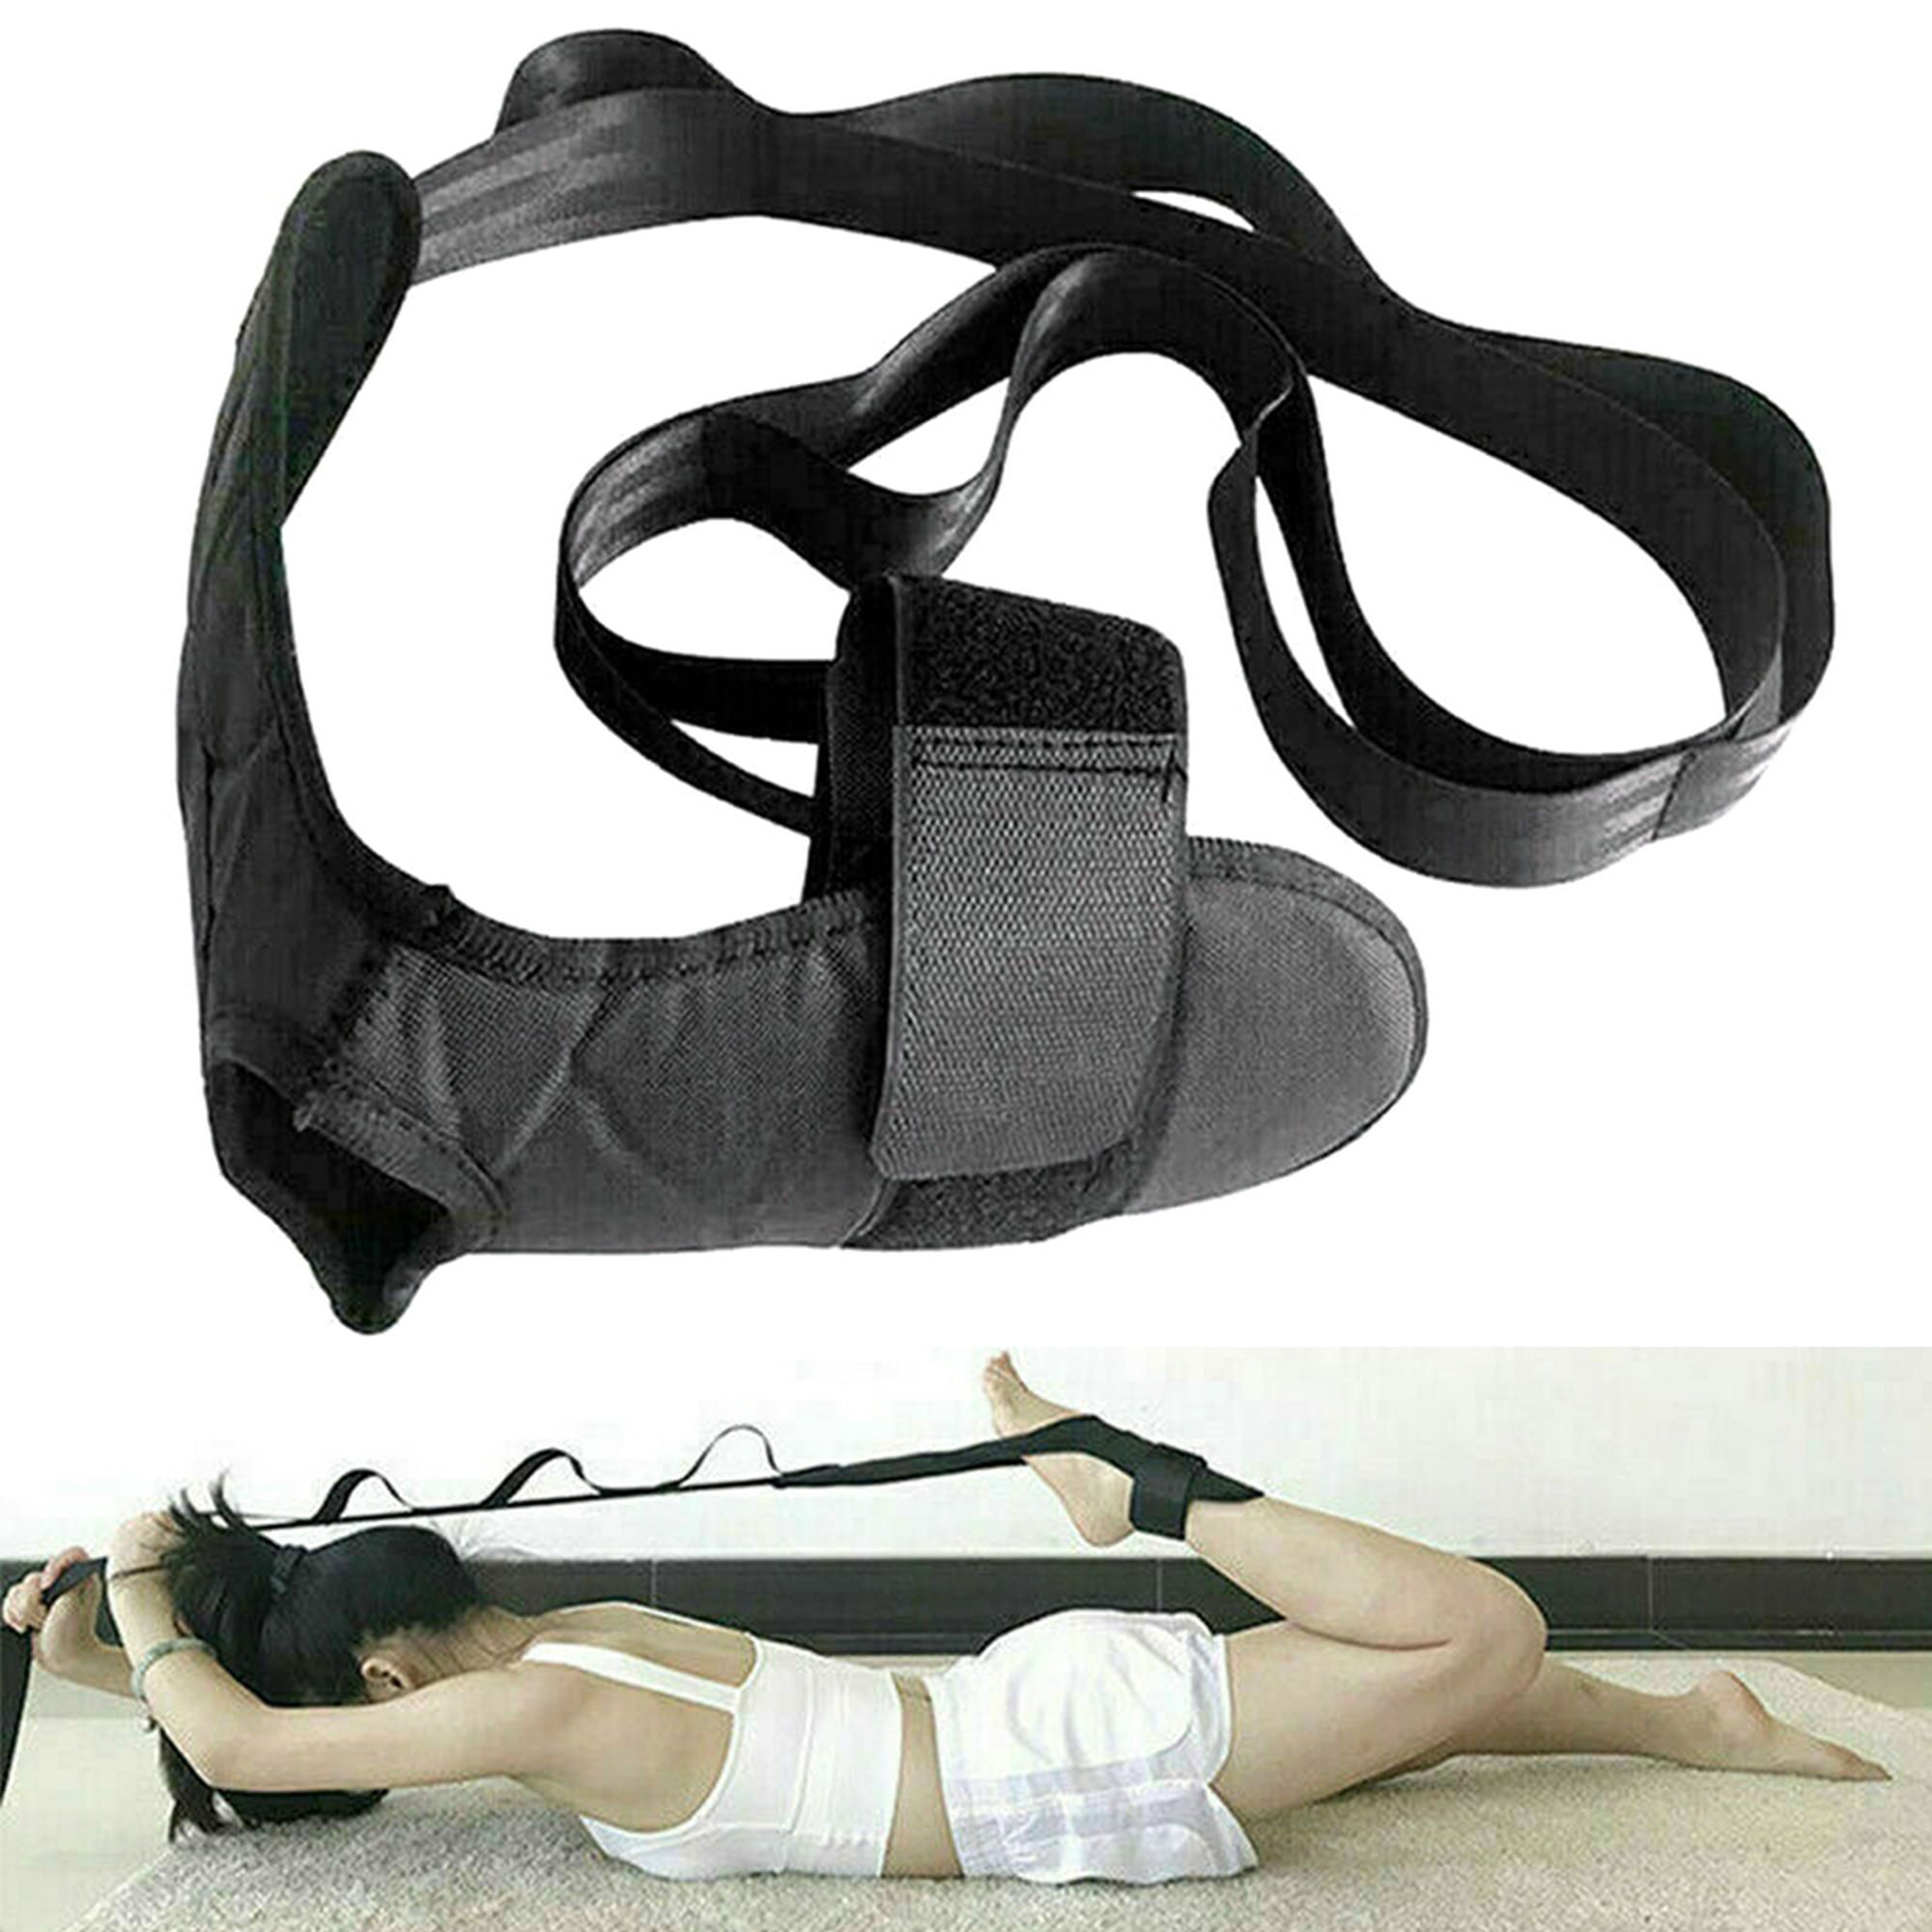 Details about   130cm Yoga Strap Belt Ankle Ligament Physical-Therapy Stretch Band Ham String 